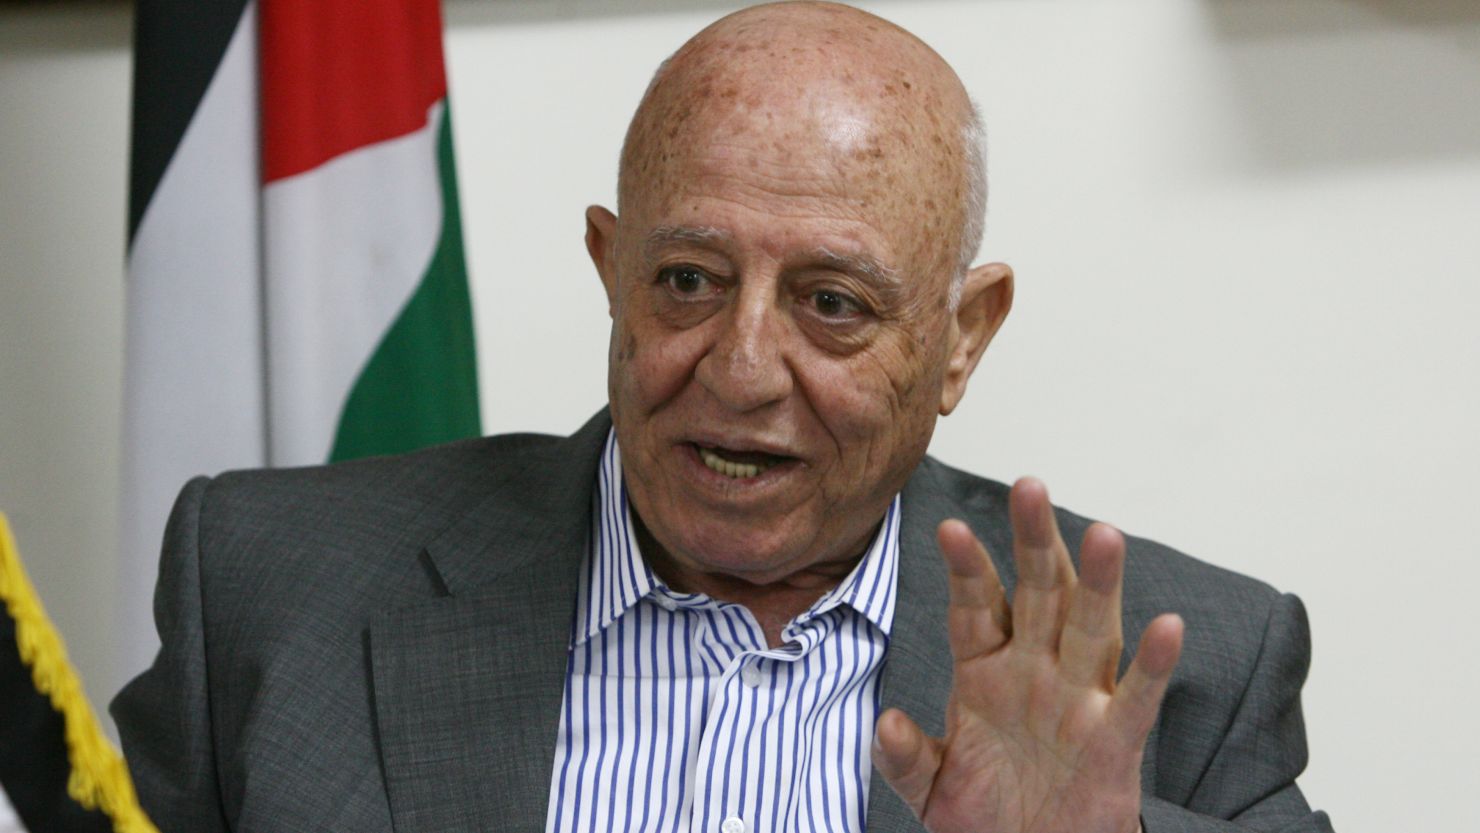 Ahmed Qorei speaks during a press conference at his office in the West Bank Jerusalem suburb of Abu Dis on March 15, 2010.